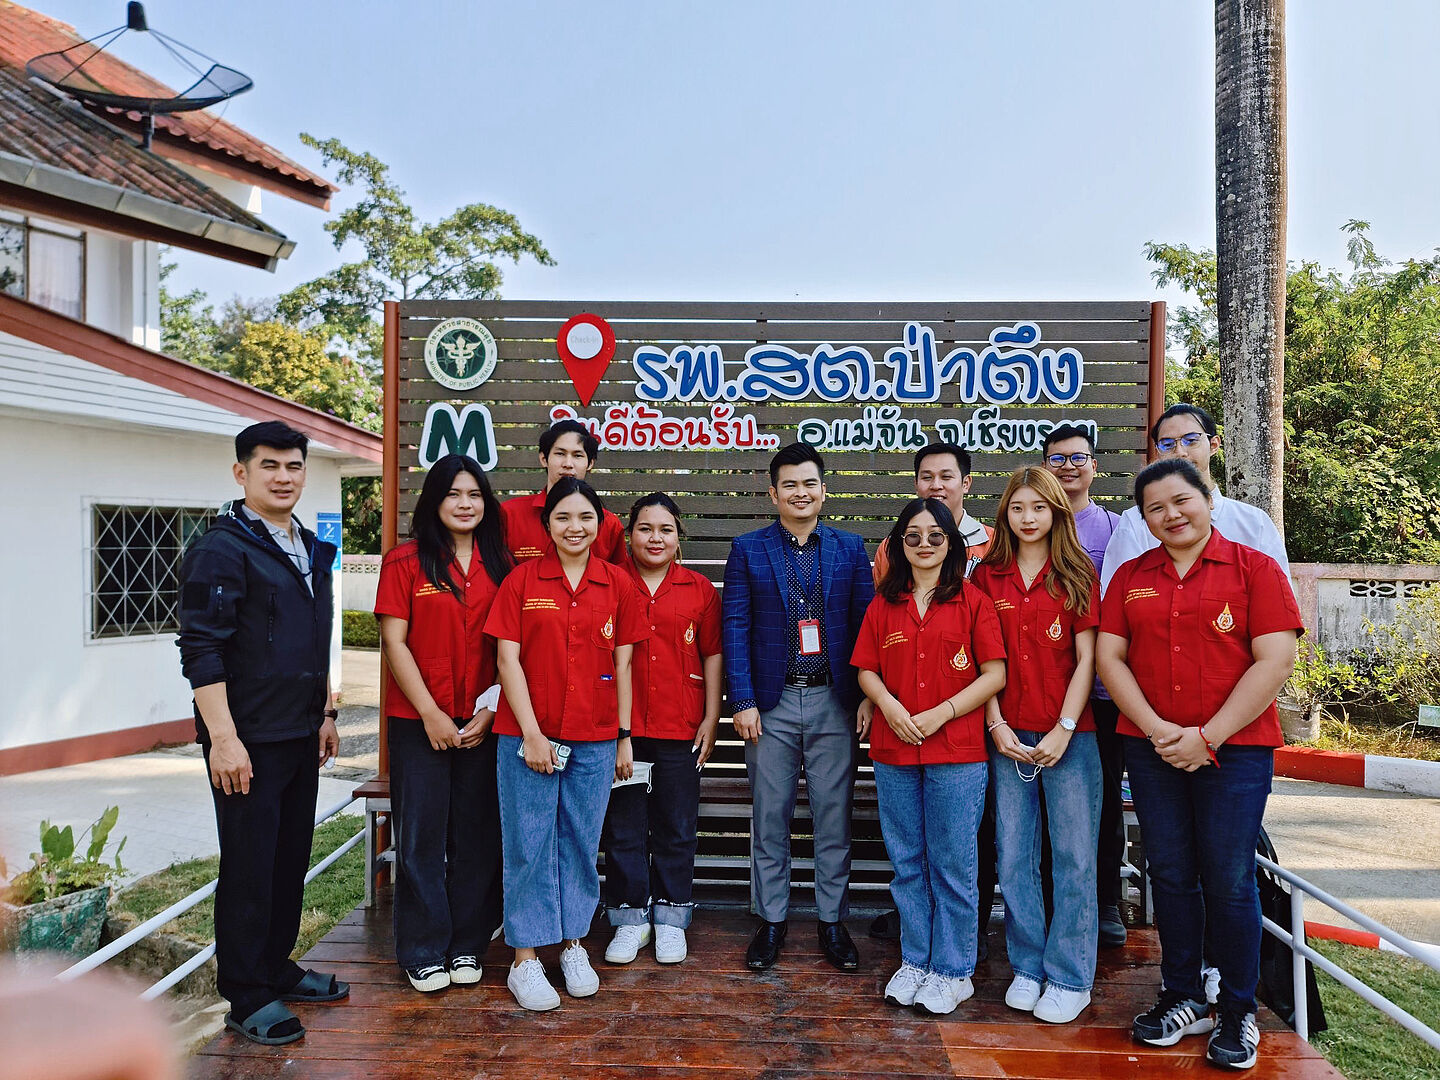 Assistant Professor Dr. Kowit Namboonmee, head of Occupational Health and Safety Program, brought students to report the results of the working environment to the Patung sub-district health promoting hospital, Mae Chan district.